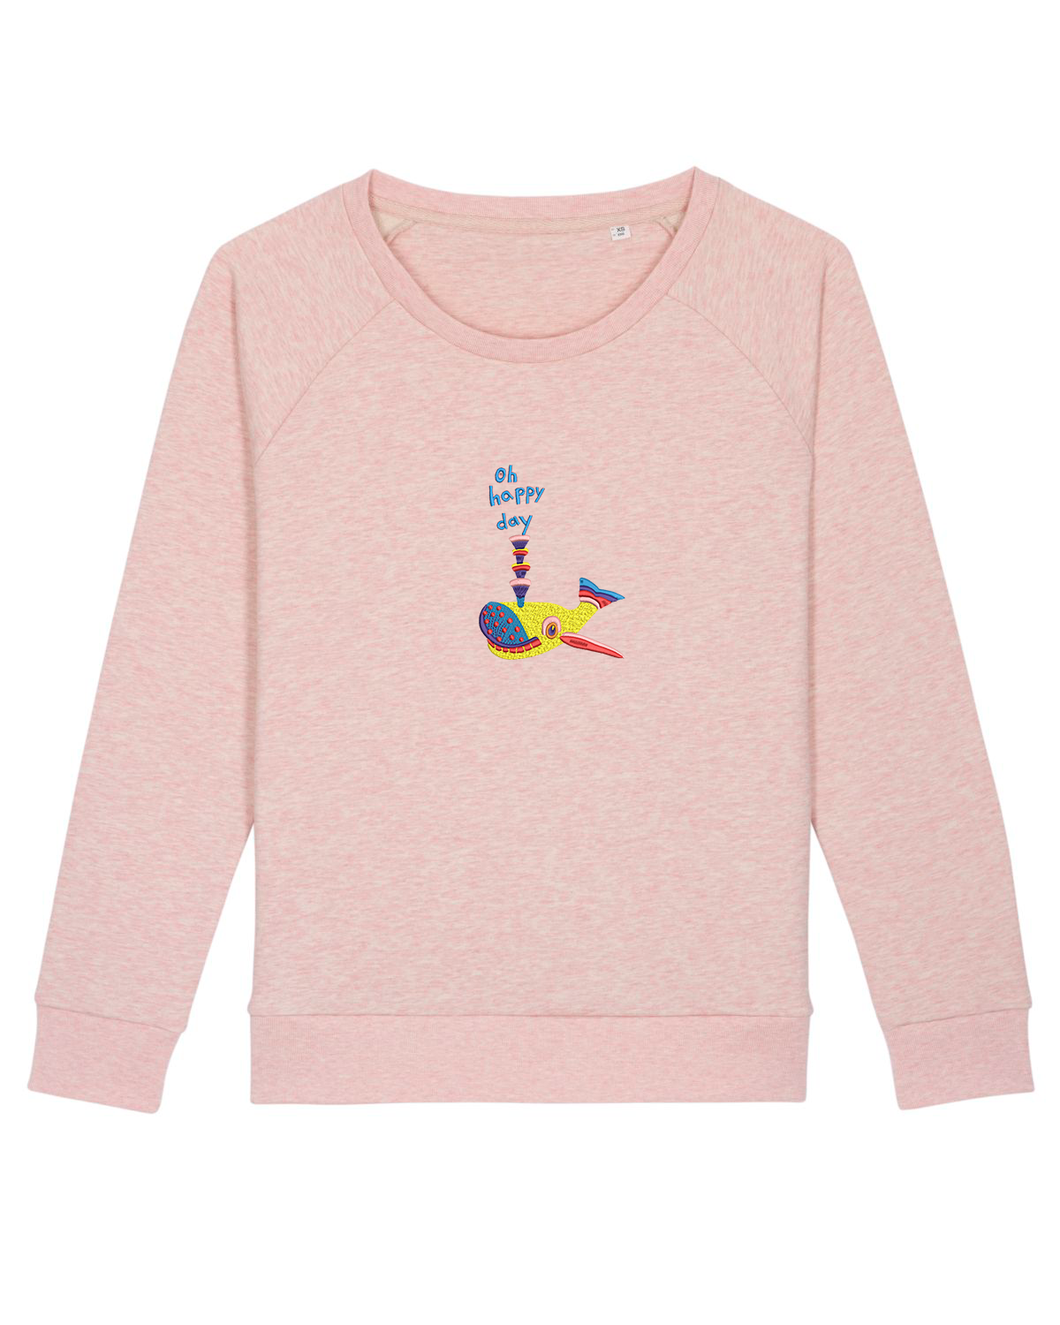 Oh happy day! 🐳- Embroidered WOMEN'S RELAXED FIT SWEATSHIRT